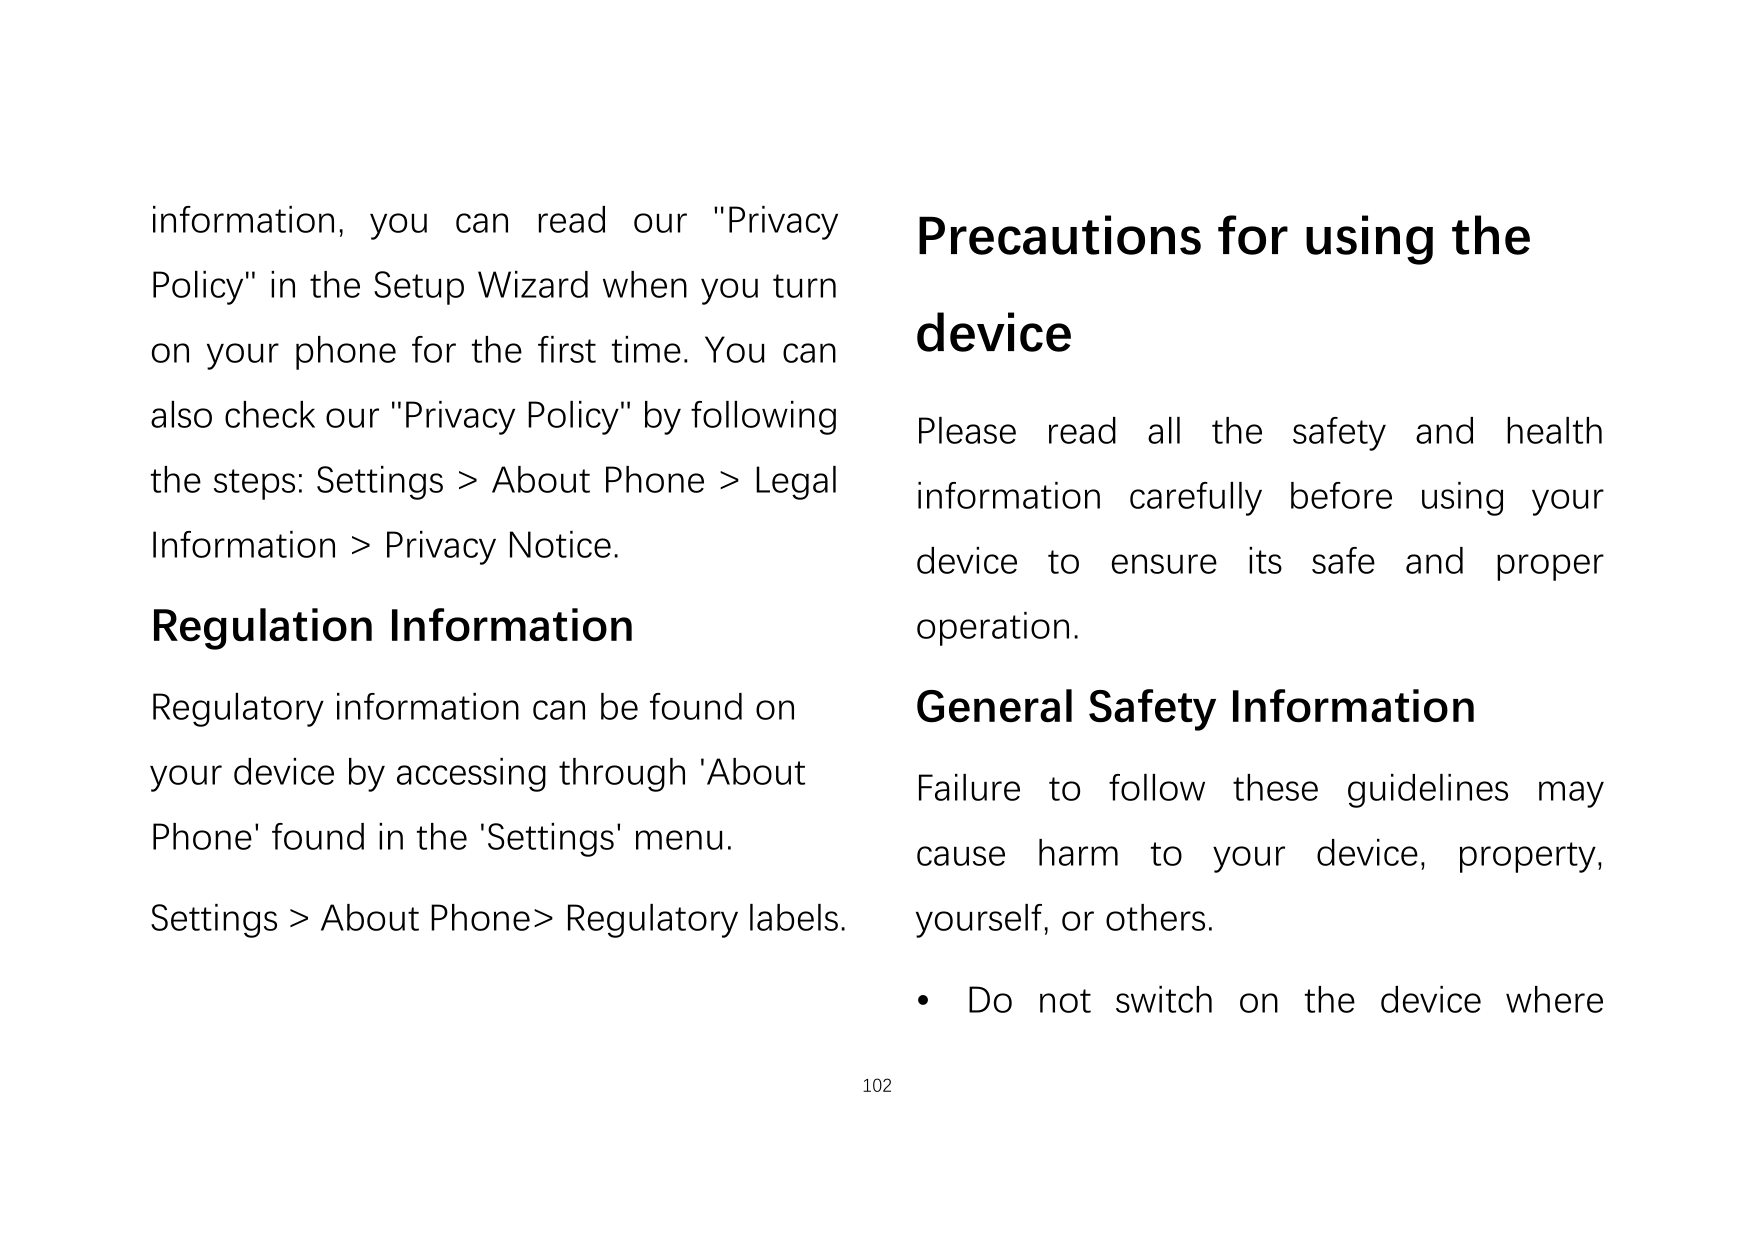 information, you can read our "PrivacyPrecautions for using thePolicy" in the Setup Wizard when you turnon your phone for the fi